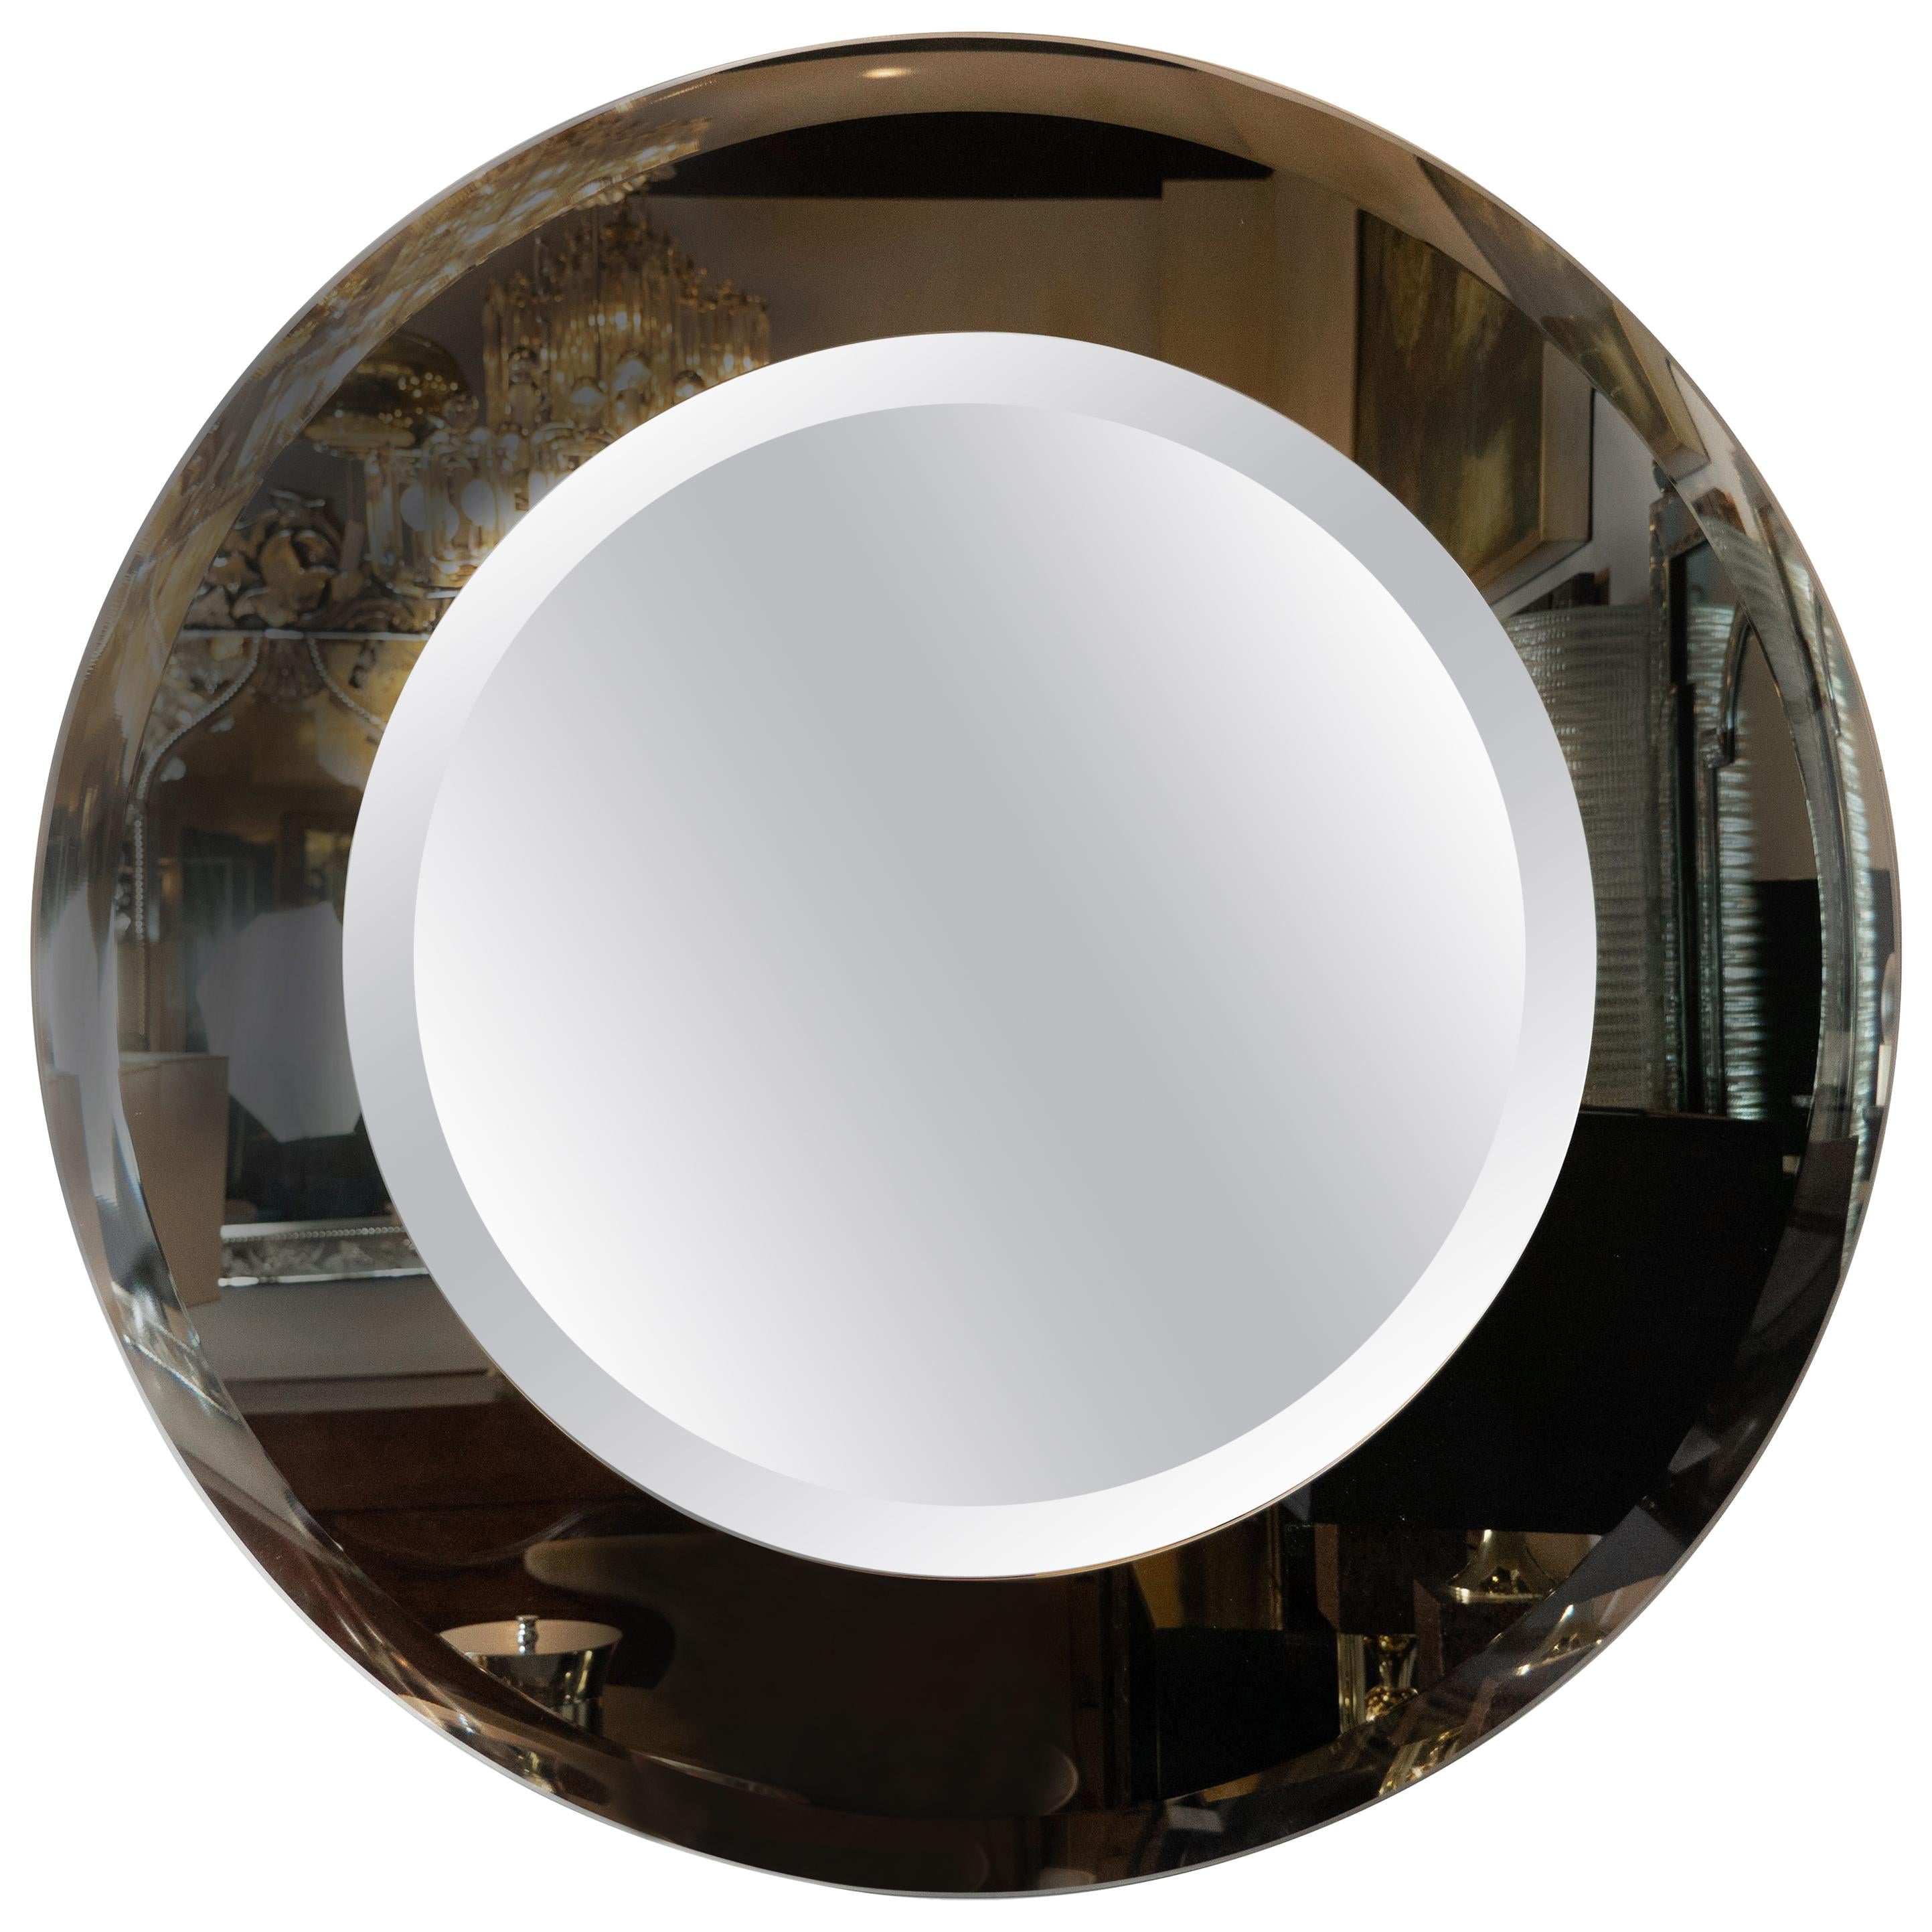 Sophisticated Modernist Custom-Made Starfire Mirror with Concentric Circles For Sale